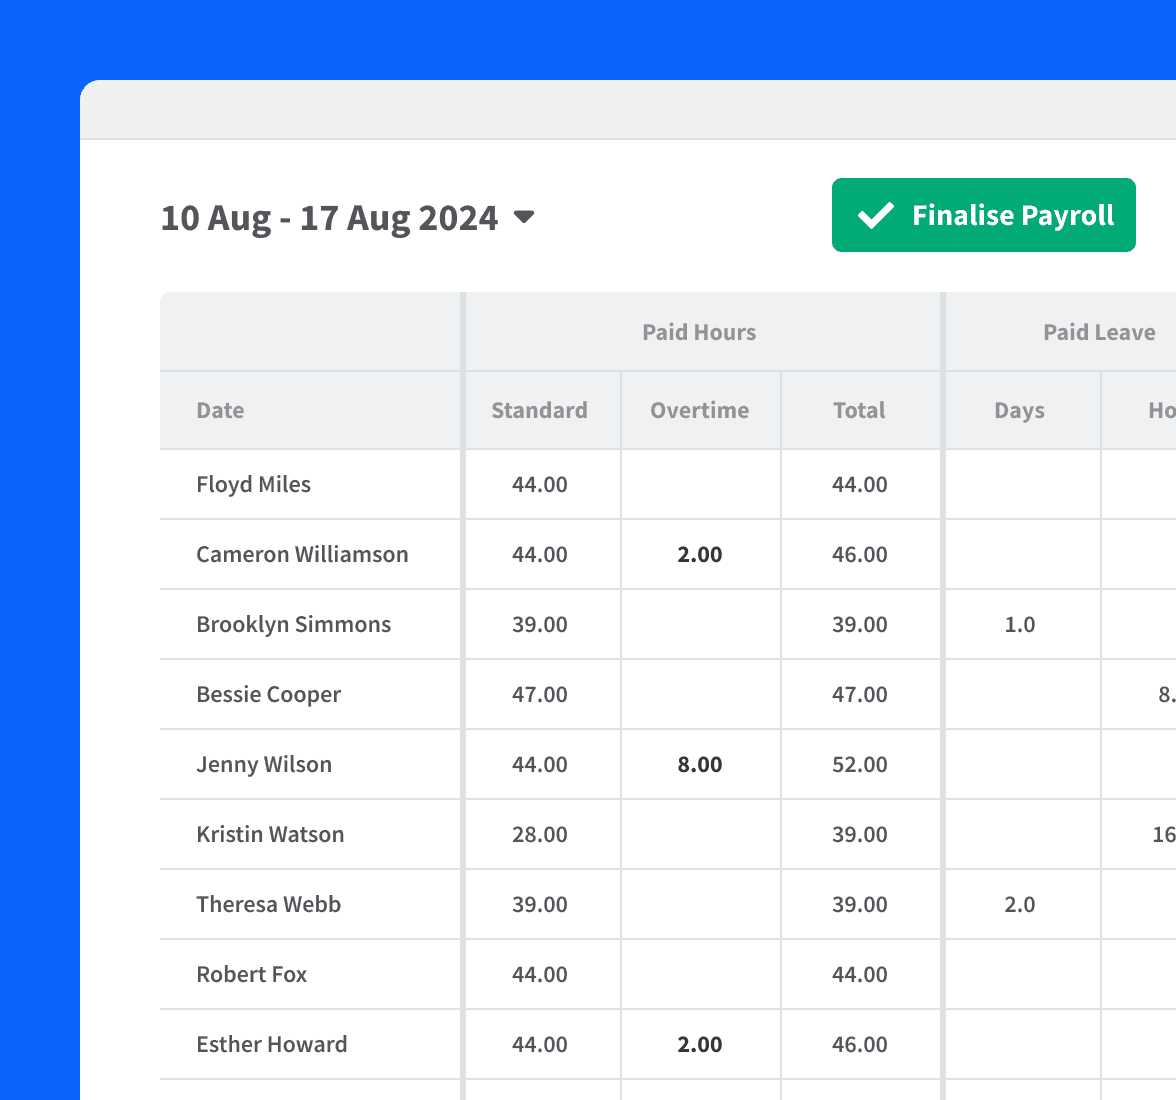 A payroll report in RotaCloud showing paid hours split between standard and overtime, and paid leave split between days and hours. A 'Finalise Payroll' button is highlighted in the top right corner.